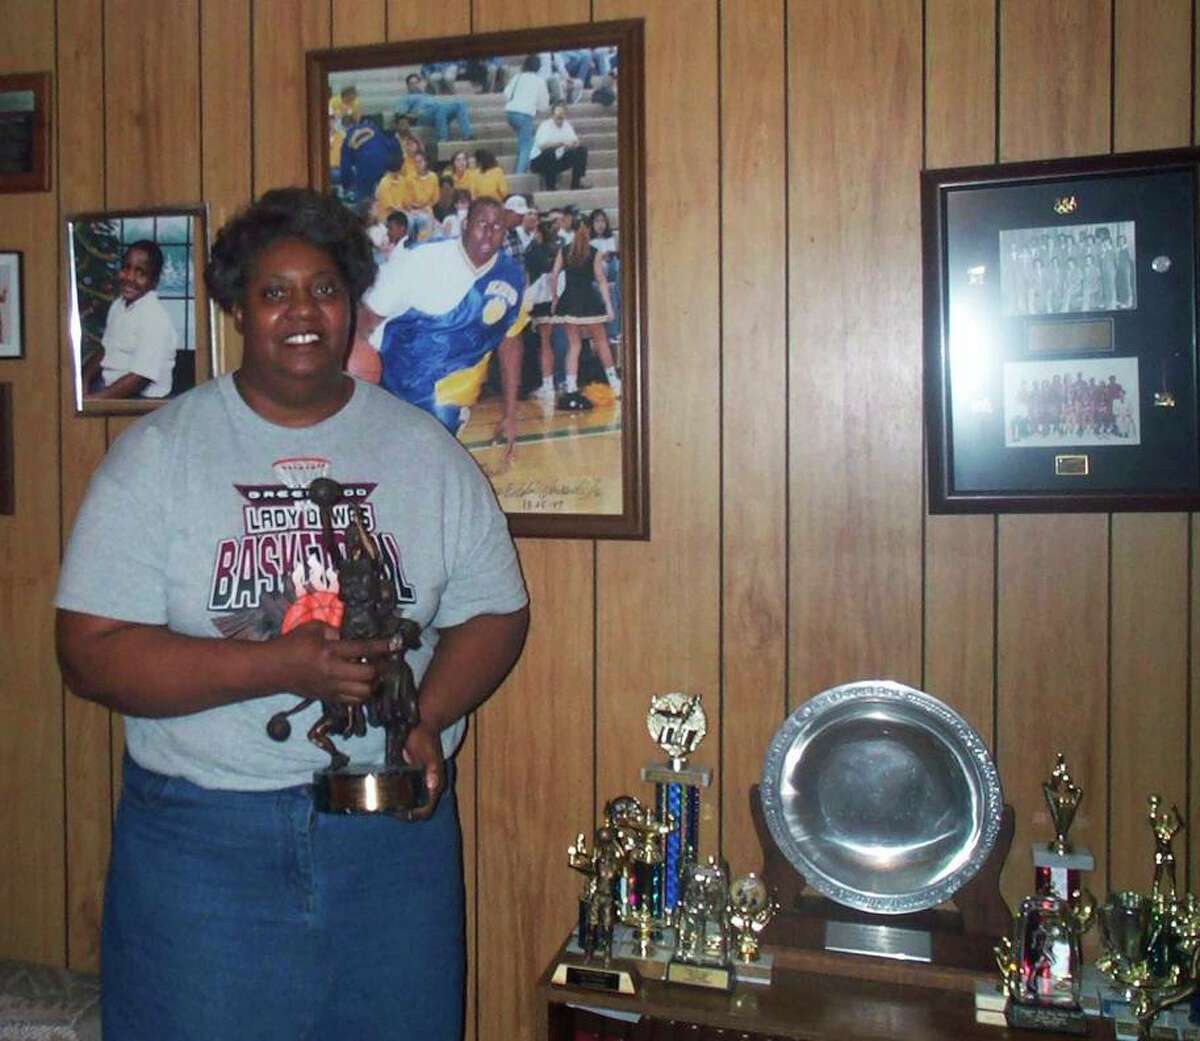 “The Queen of Basketball,” about Hall of Famer Lusia Harris, won an Oscar in the short subject documentary category.